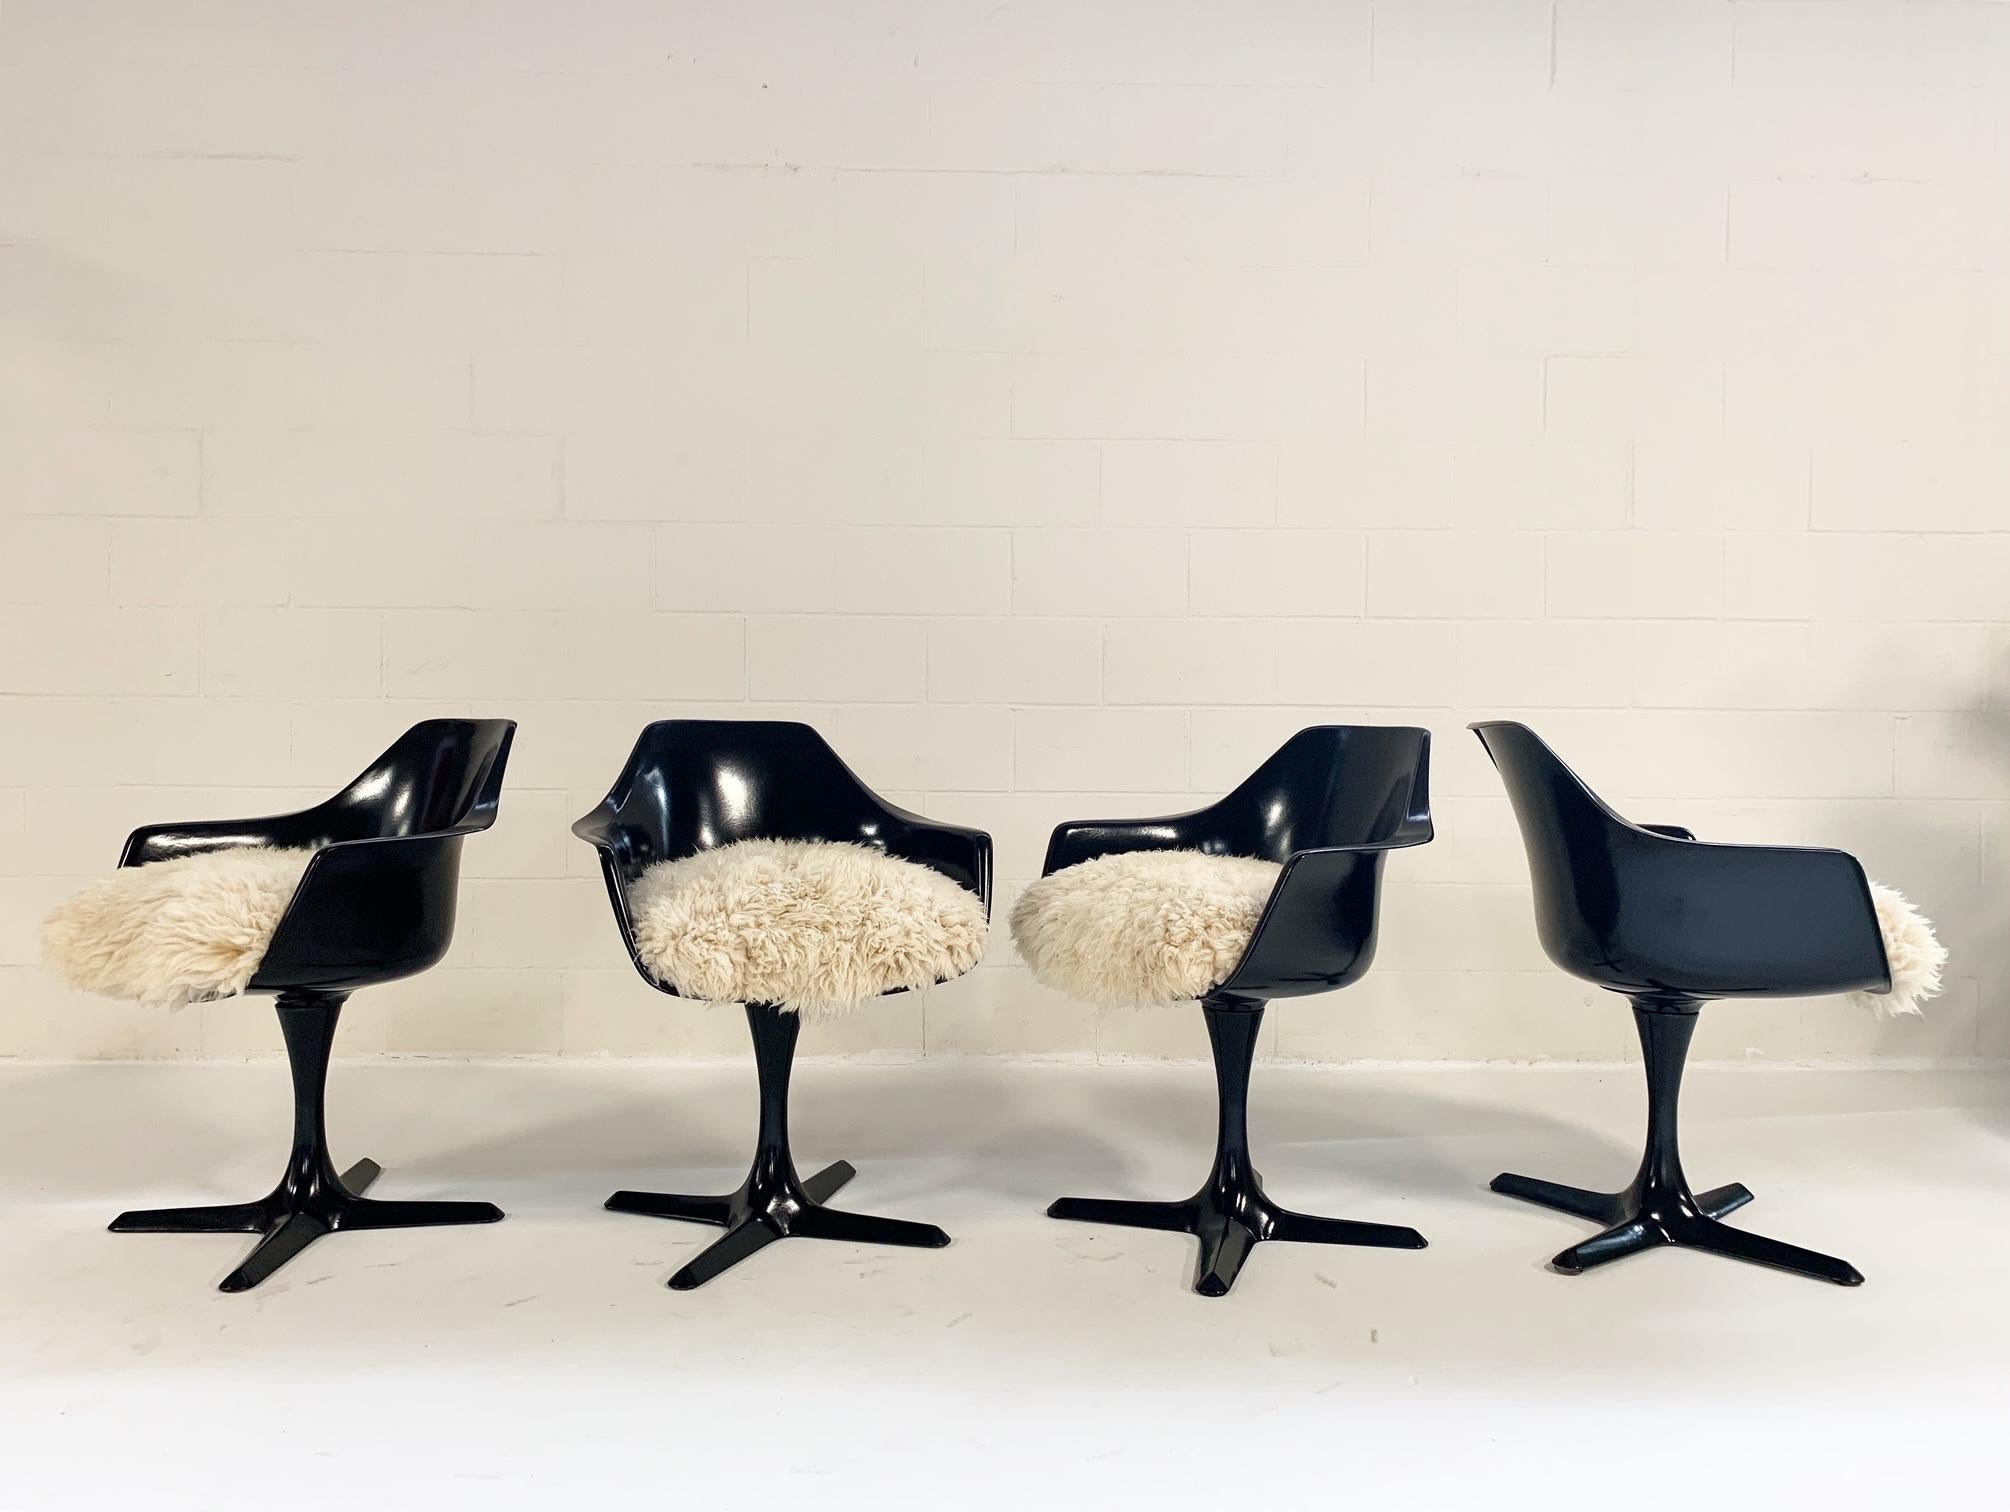 The Tulip style chair from Burke Inc. was inspired by the famous Eero Saarinen Tulip chair. The most noticeable difference between the two designs is the base. The Burke chair has a star-shaped base. Burke mass produced their chairs in the 1960s to